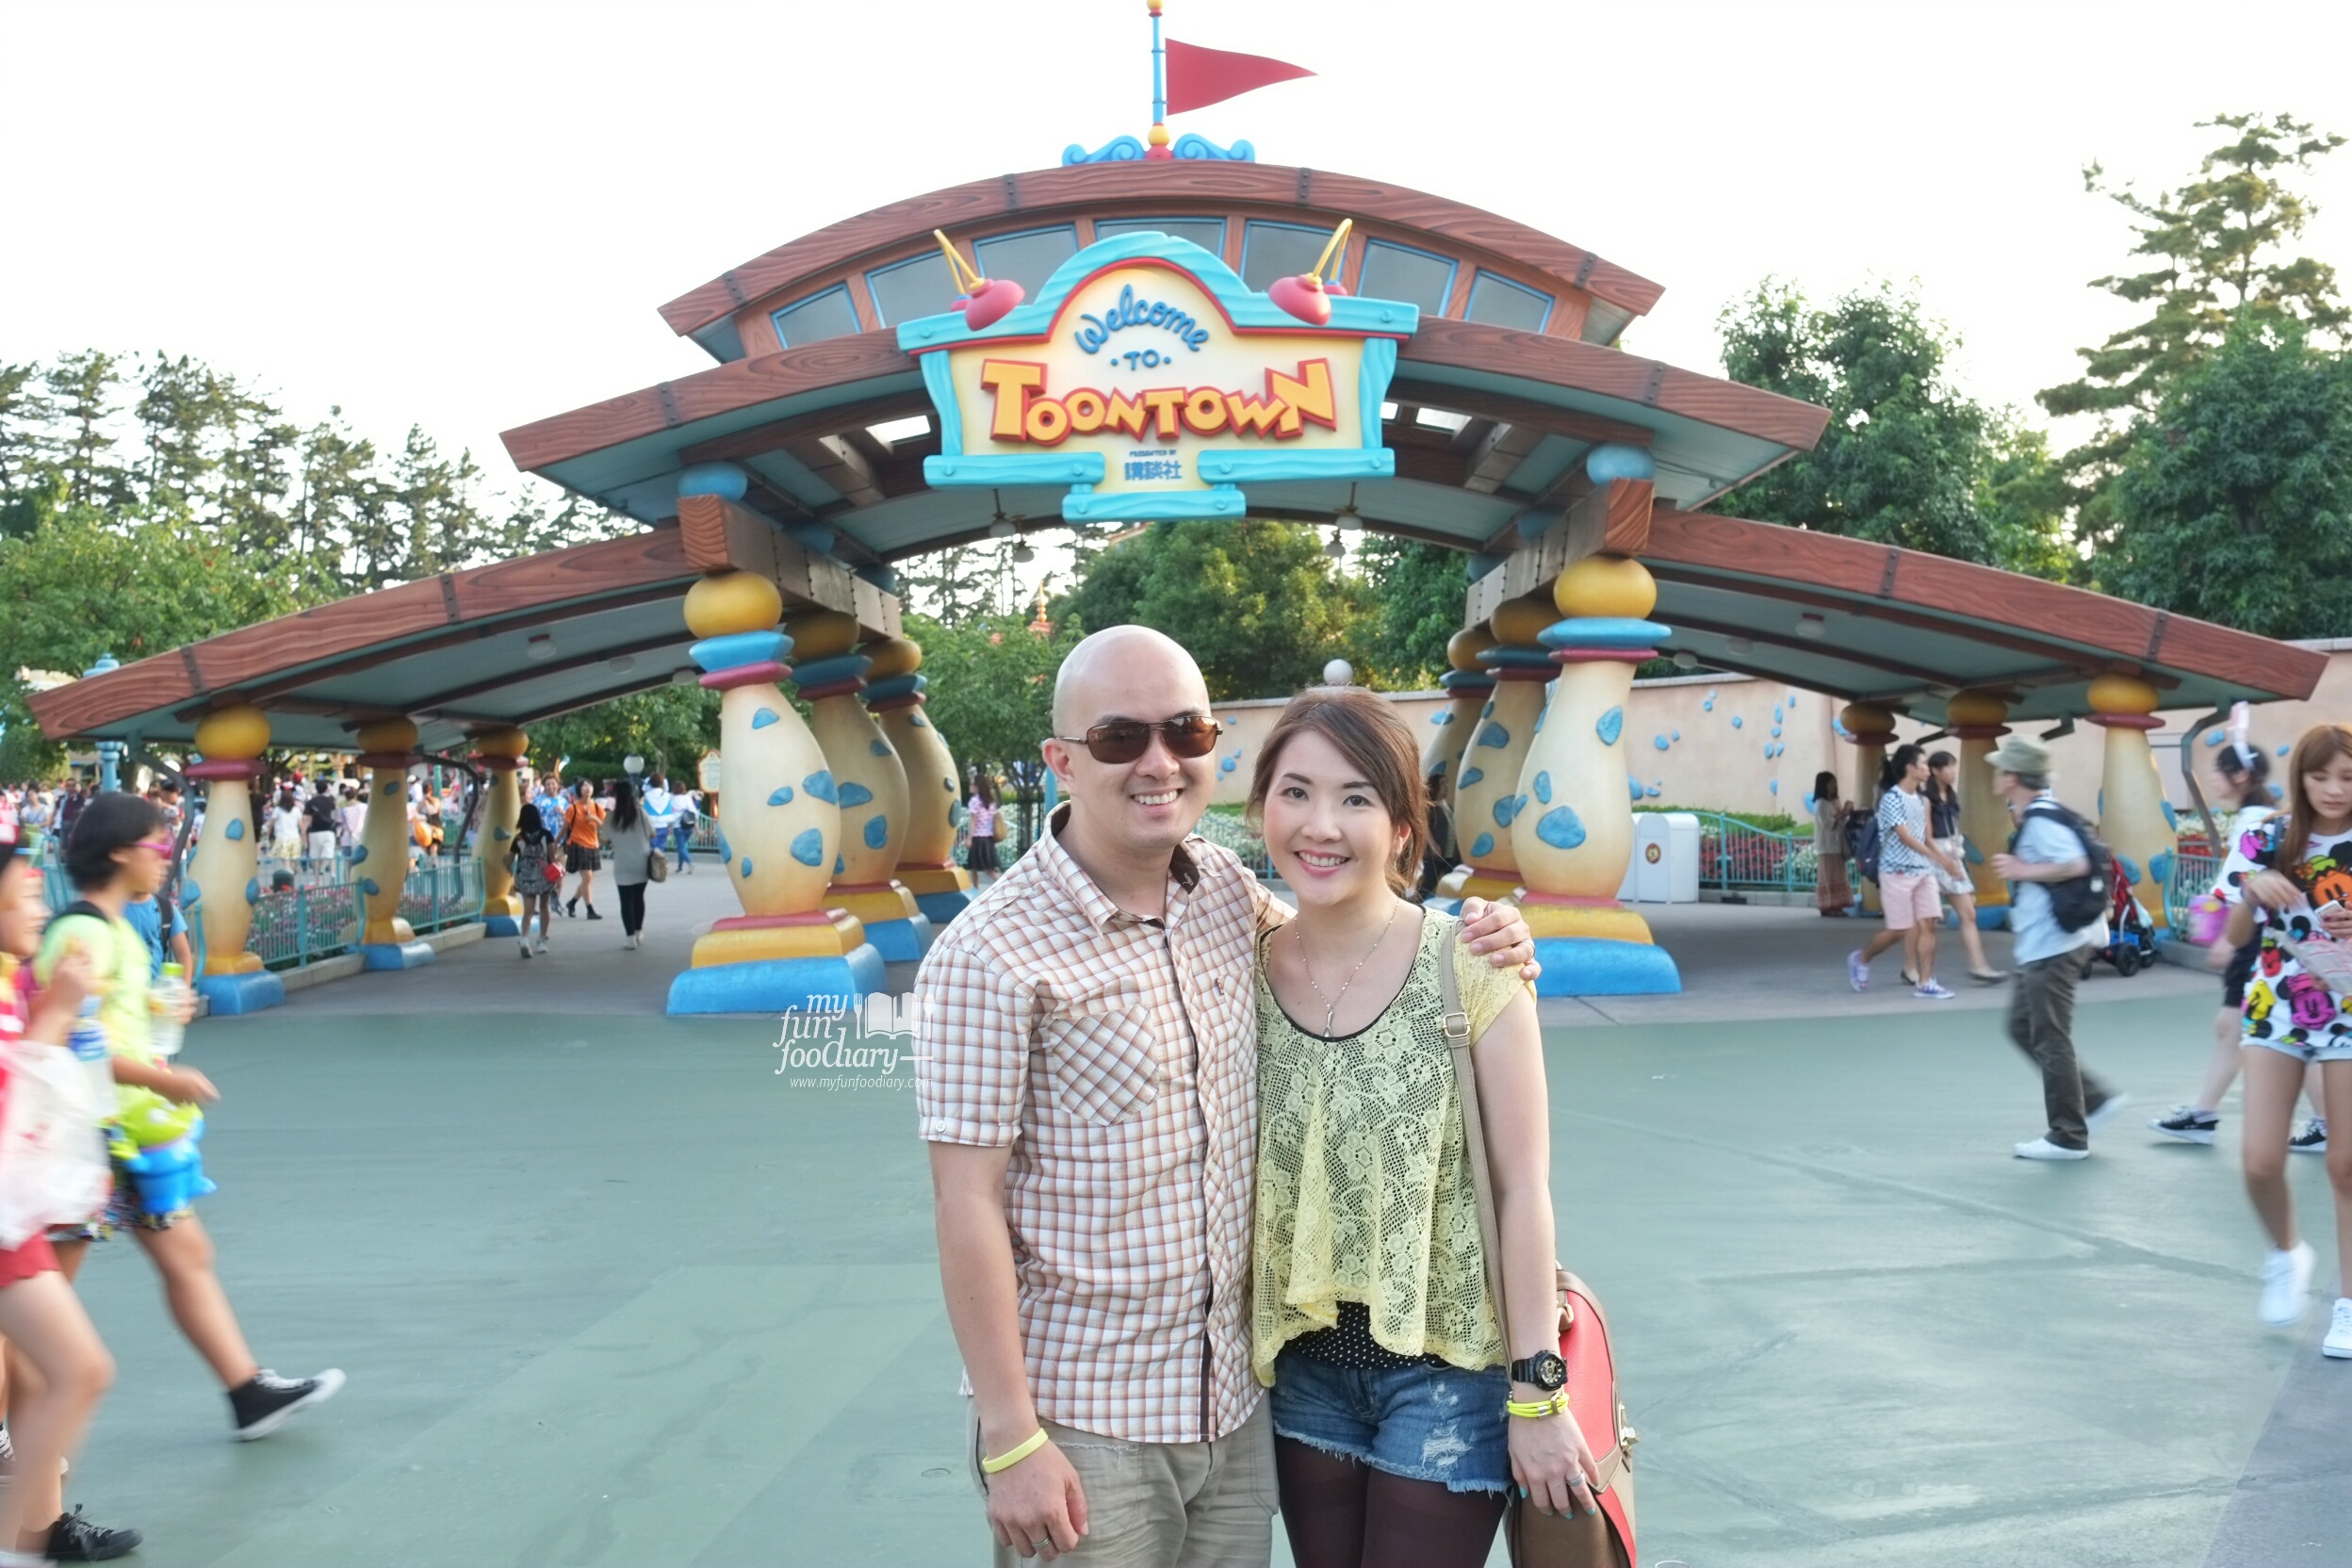 Mullie and Andy at ToonTown Tokyo Disneyland by Myfunfoodiary